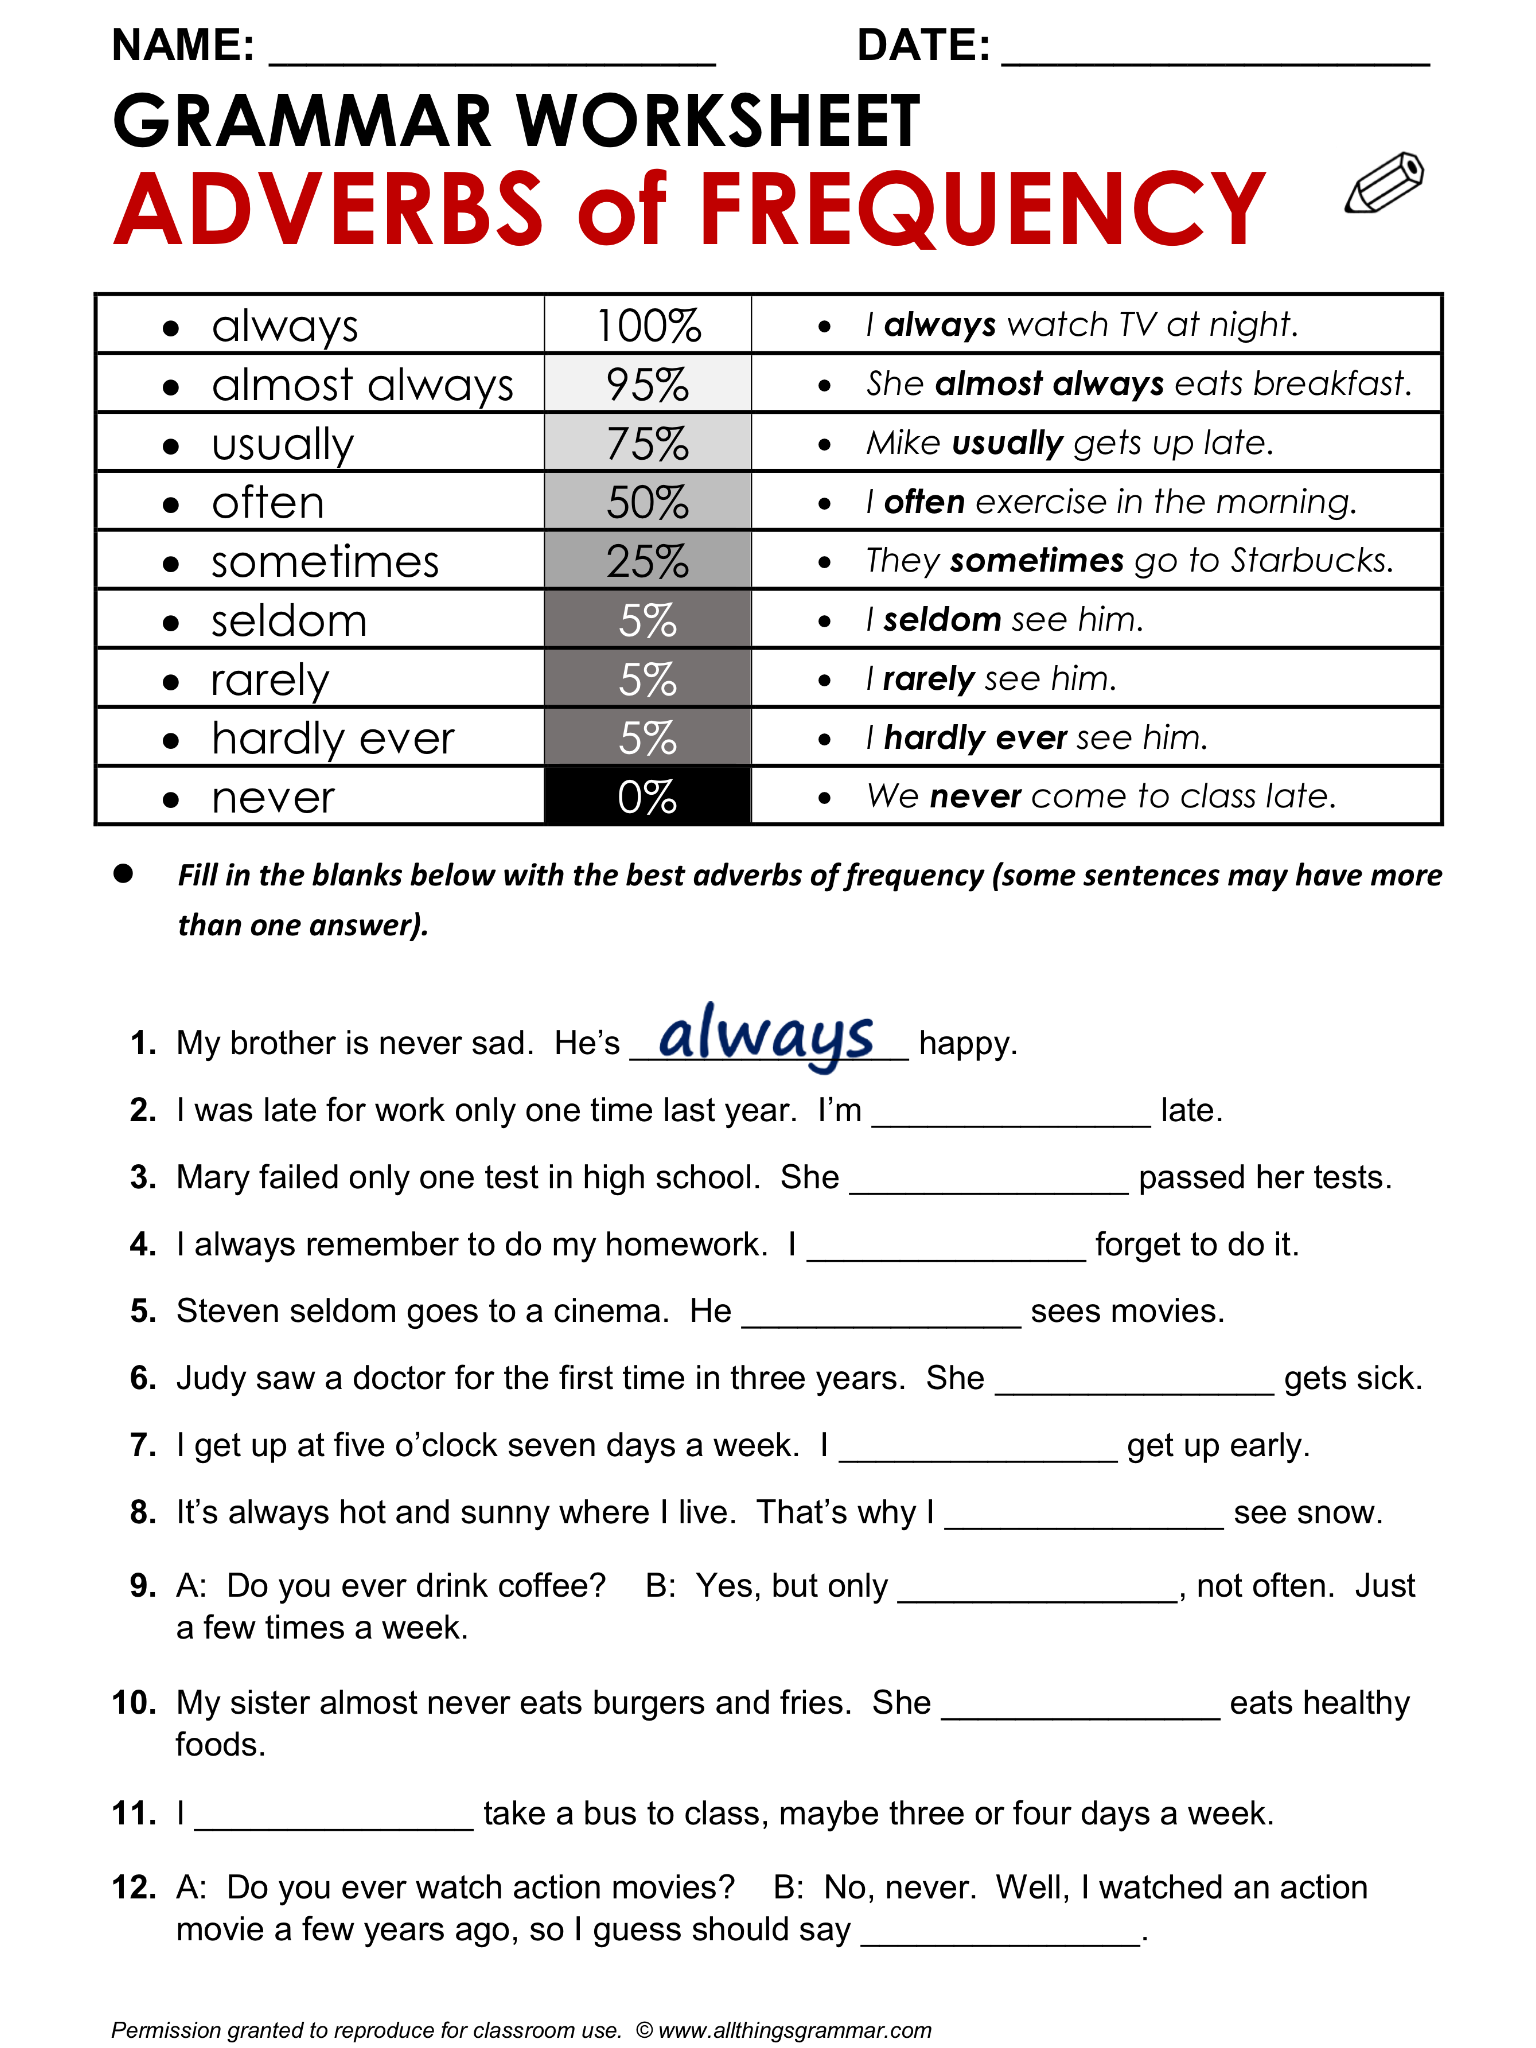 Adverbs Of Frequency And Degree Exercises